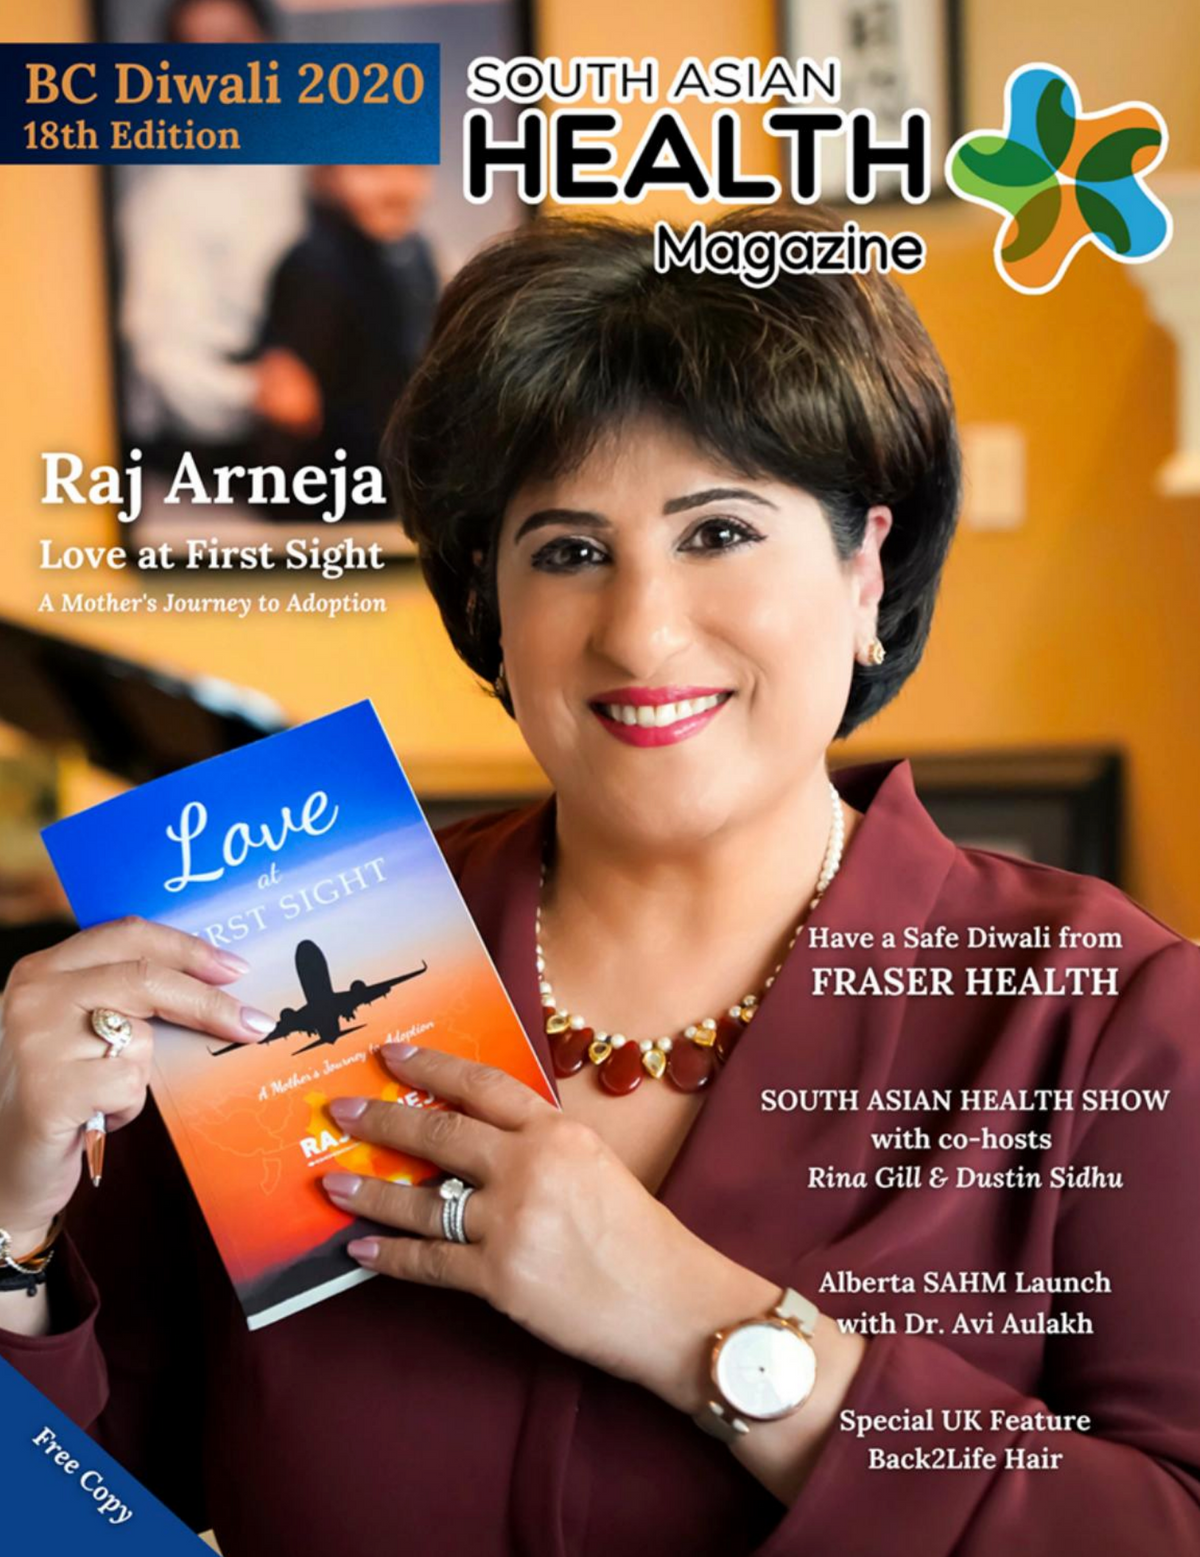 Back2Life Featured In South Asian Health Magazine